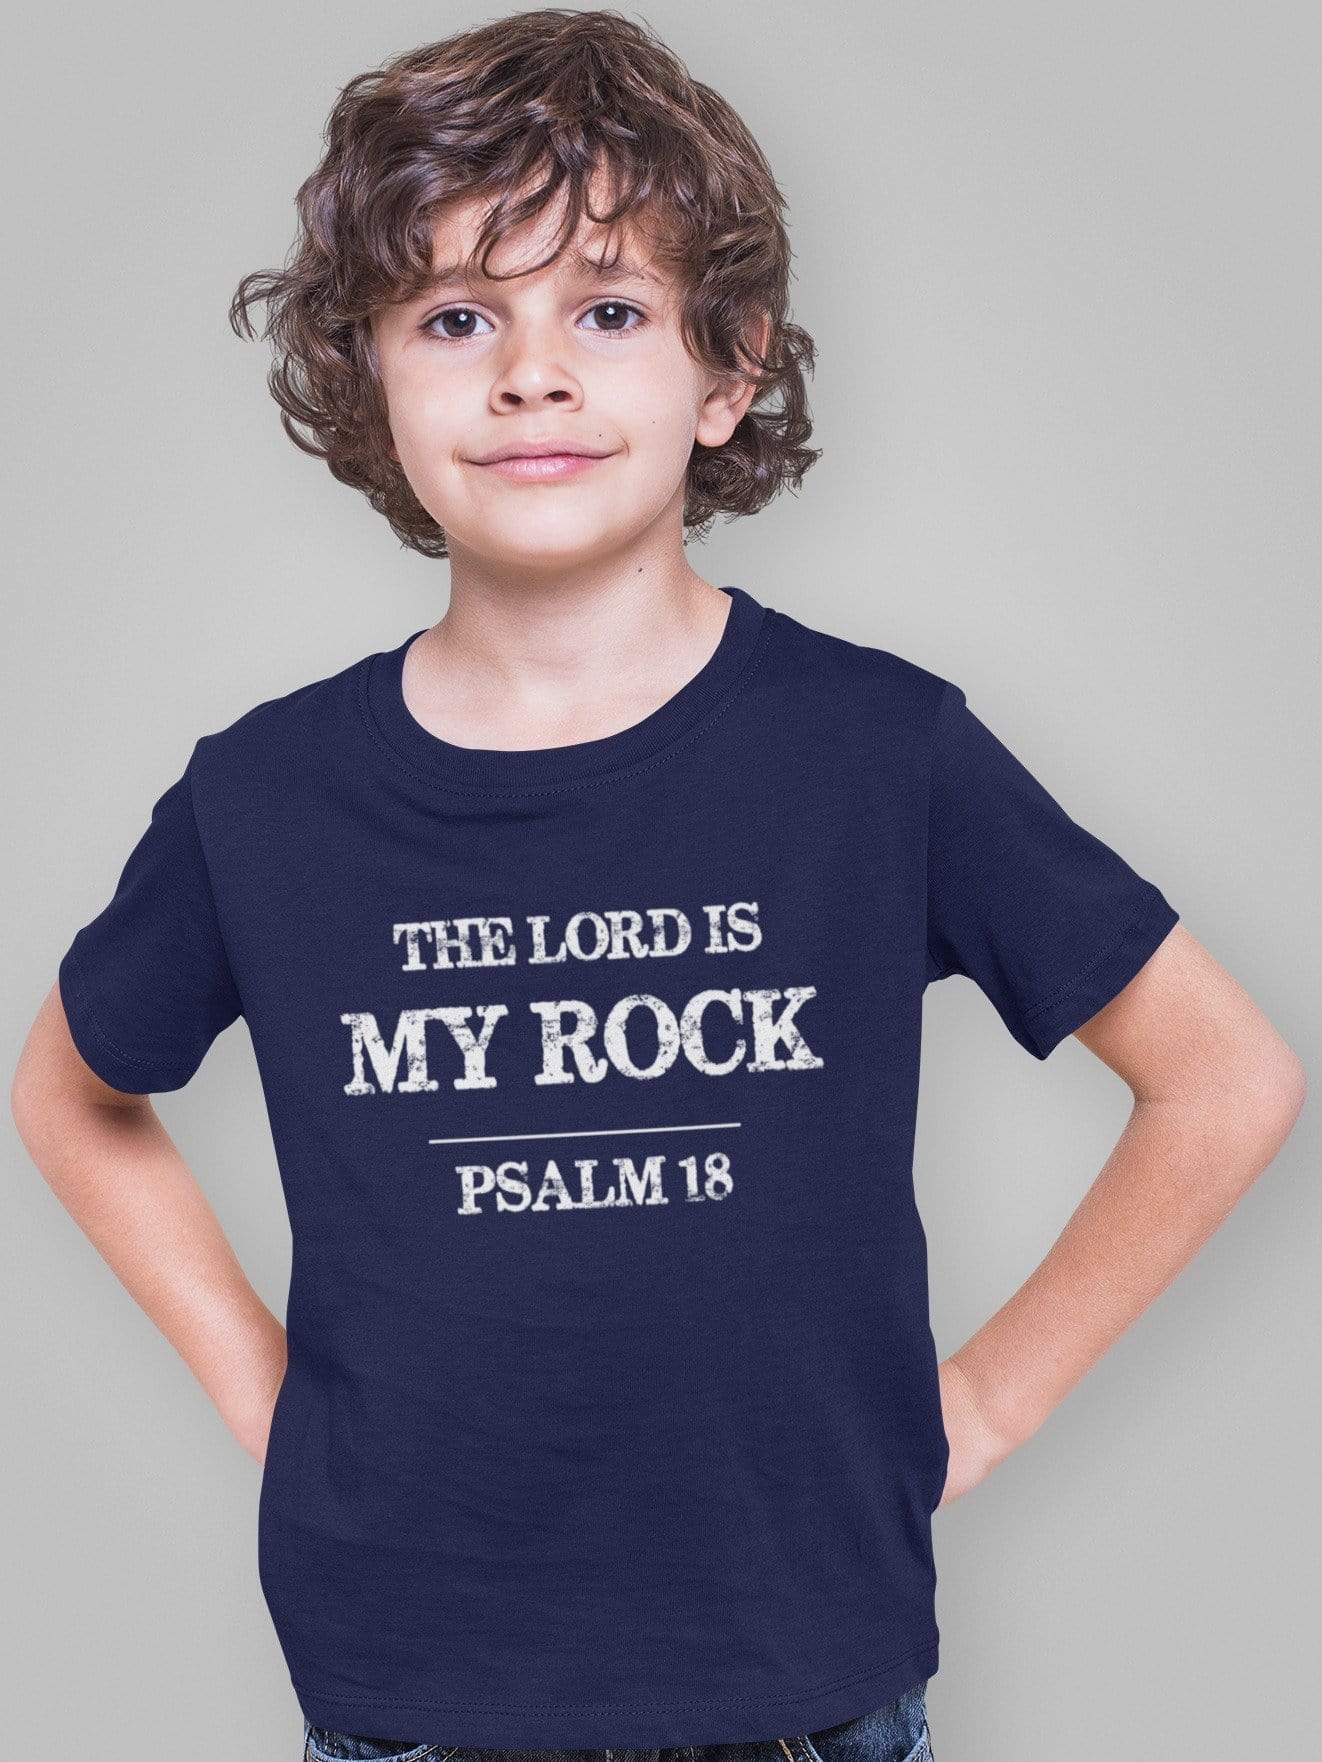 Living Words Kids Round Neck T Shirt Boy / 0-12 Mn / Navy Blue The Lord is my Rock - Psalm 18